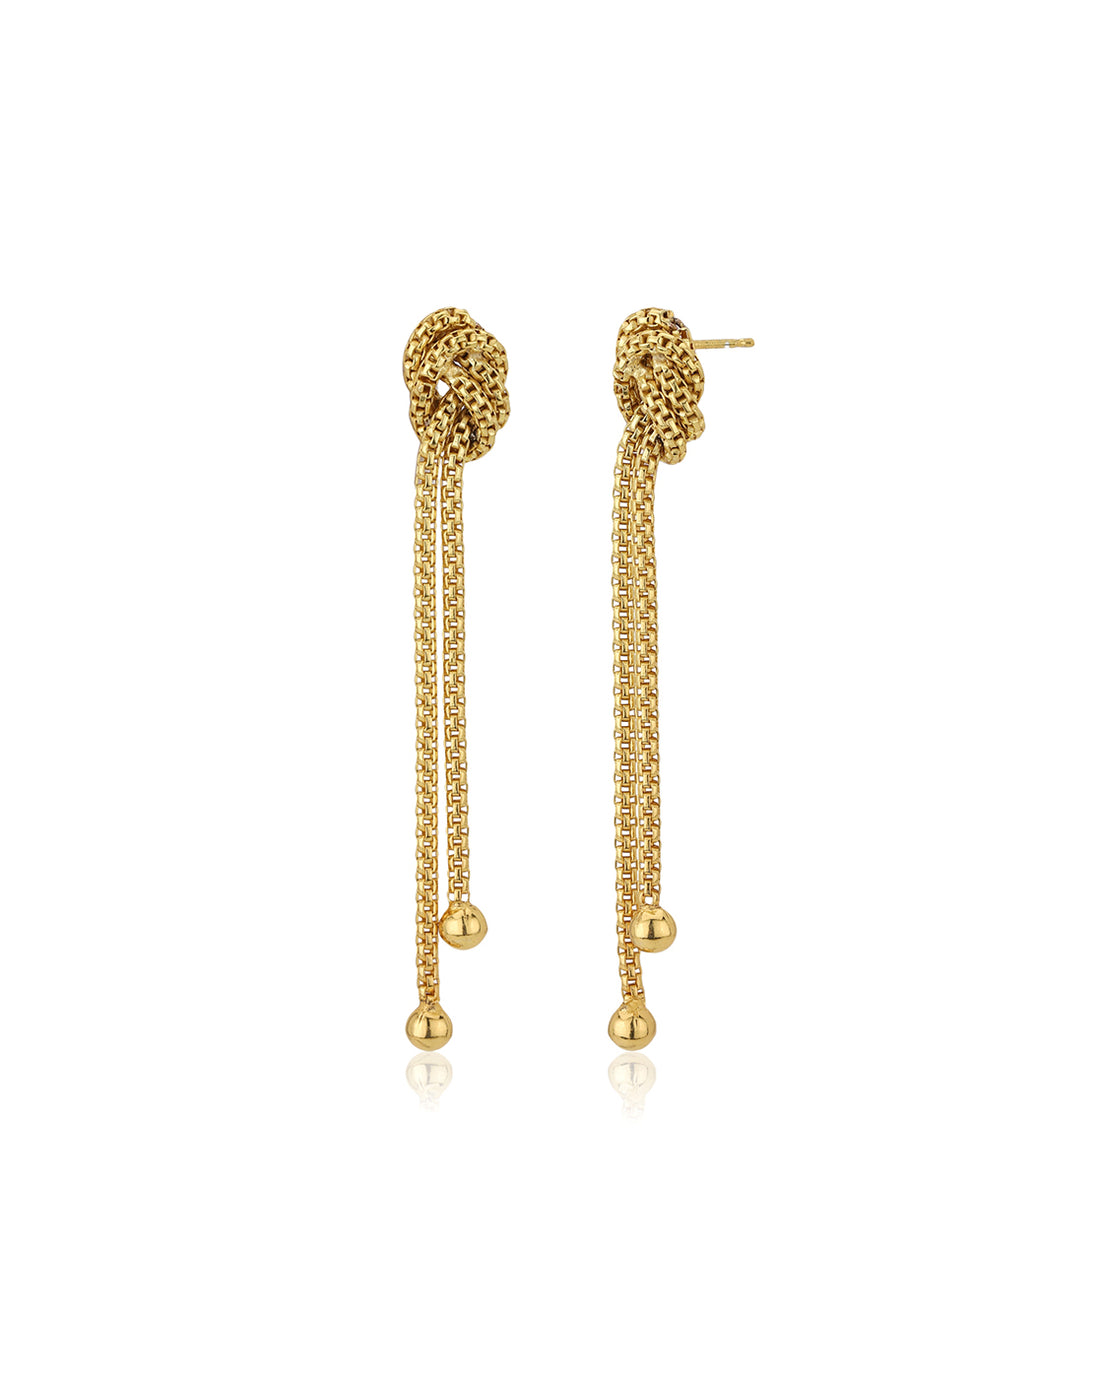 Carlton London Gold Plated Contemporary Drop Earring For Women